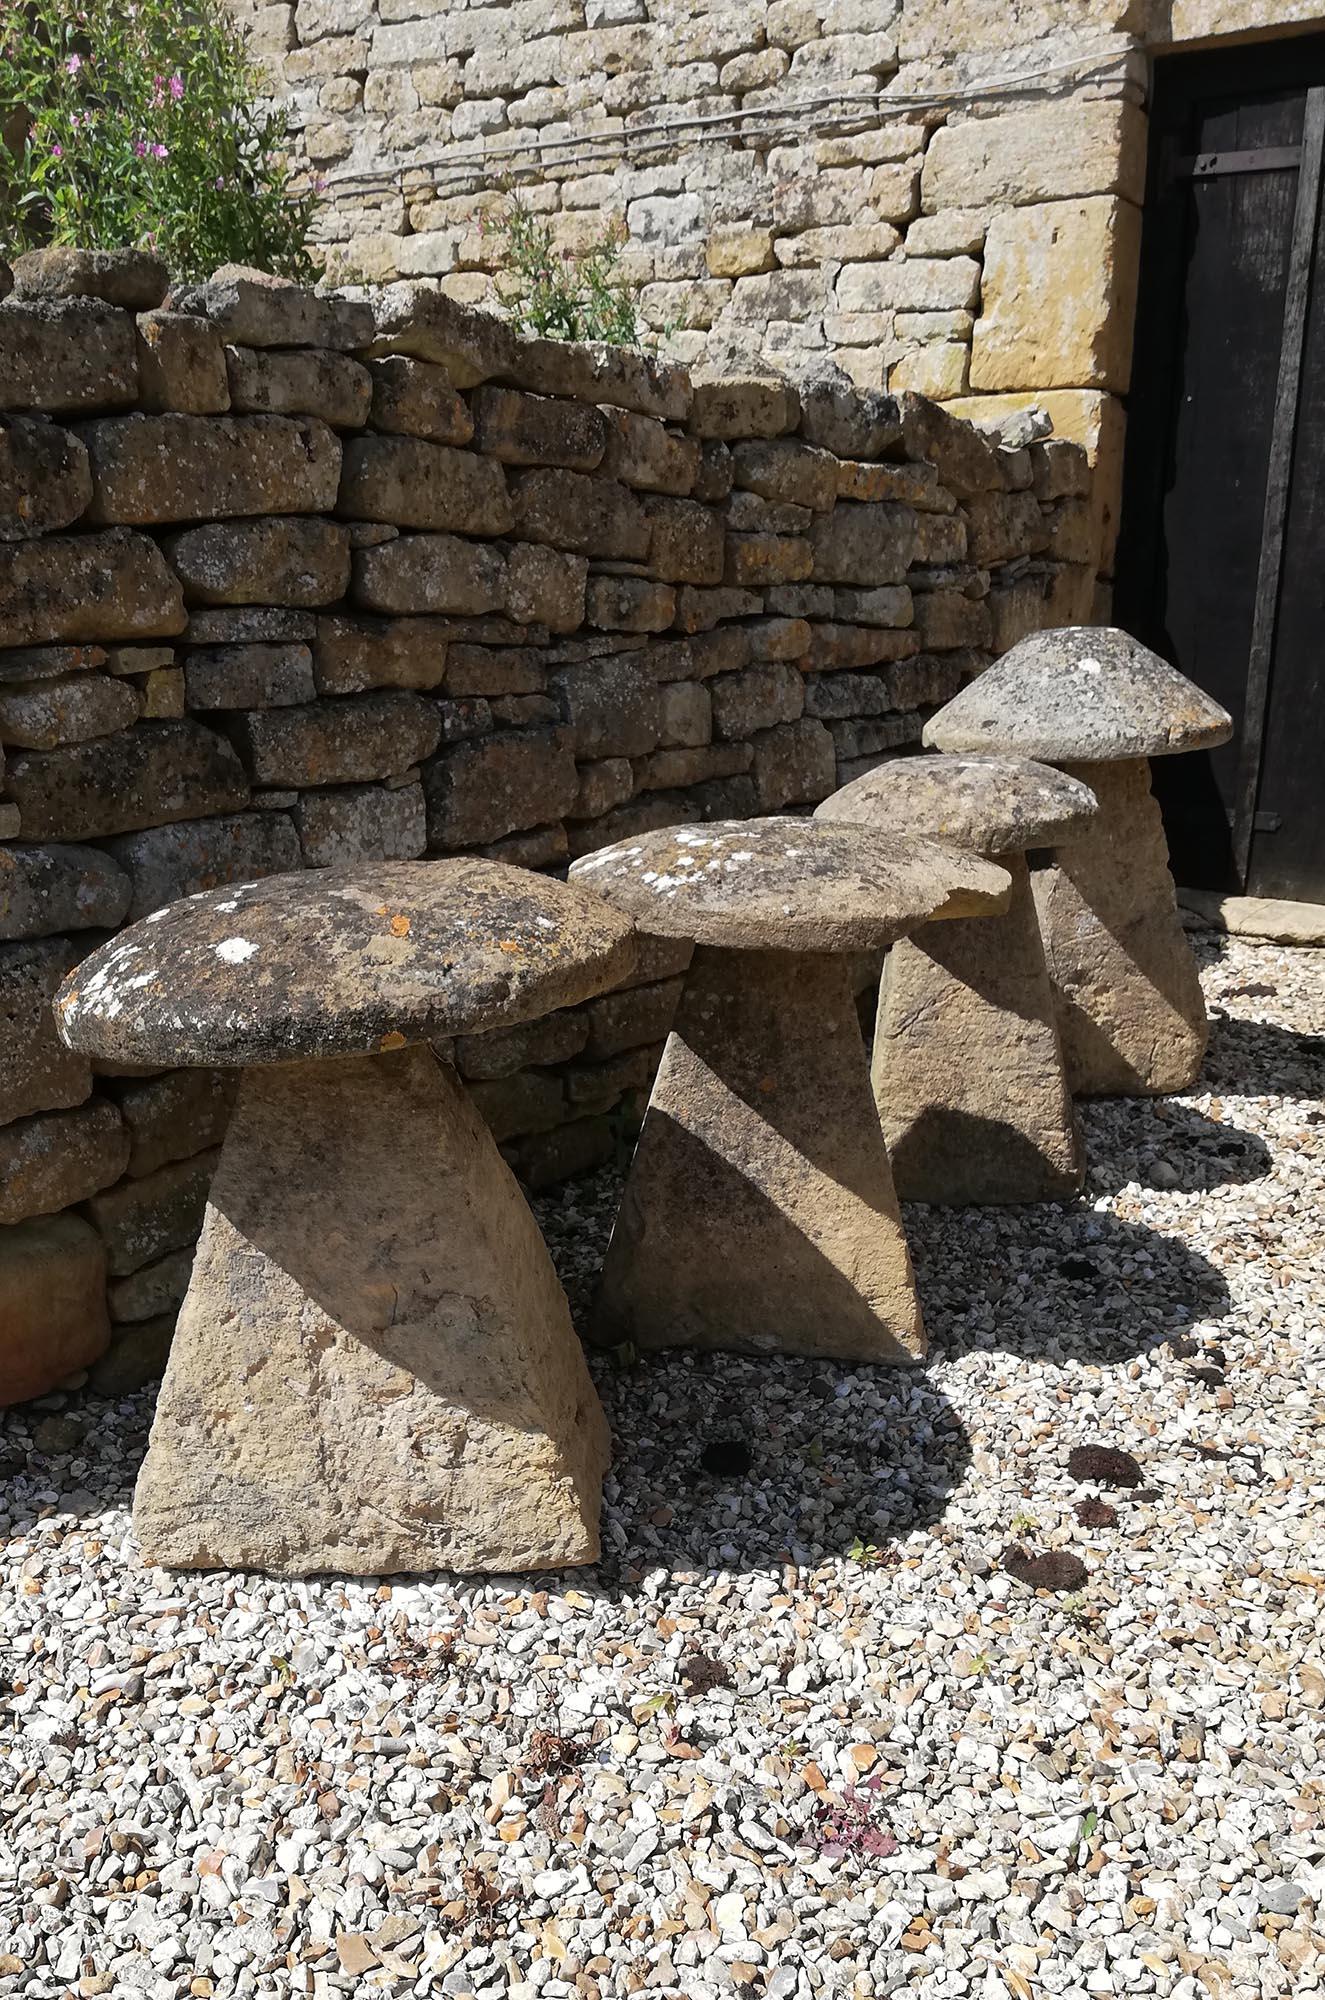 Varying heights from 72 - 90 cm. Varying diameters from 47 - 63 cm

Defined as ‘a low mushroom shaped arrangement of a conical and flat circular stone used as a support for a haystack’, the staddle stone is asked about more than any other item we